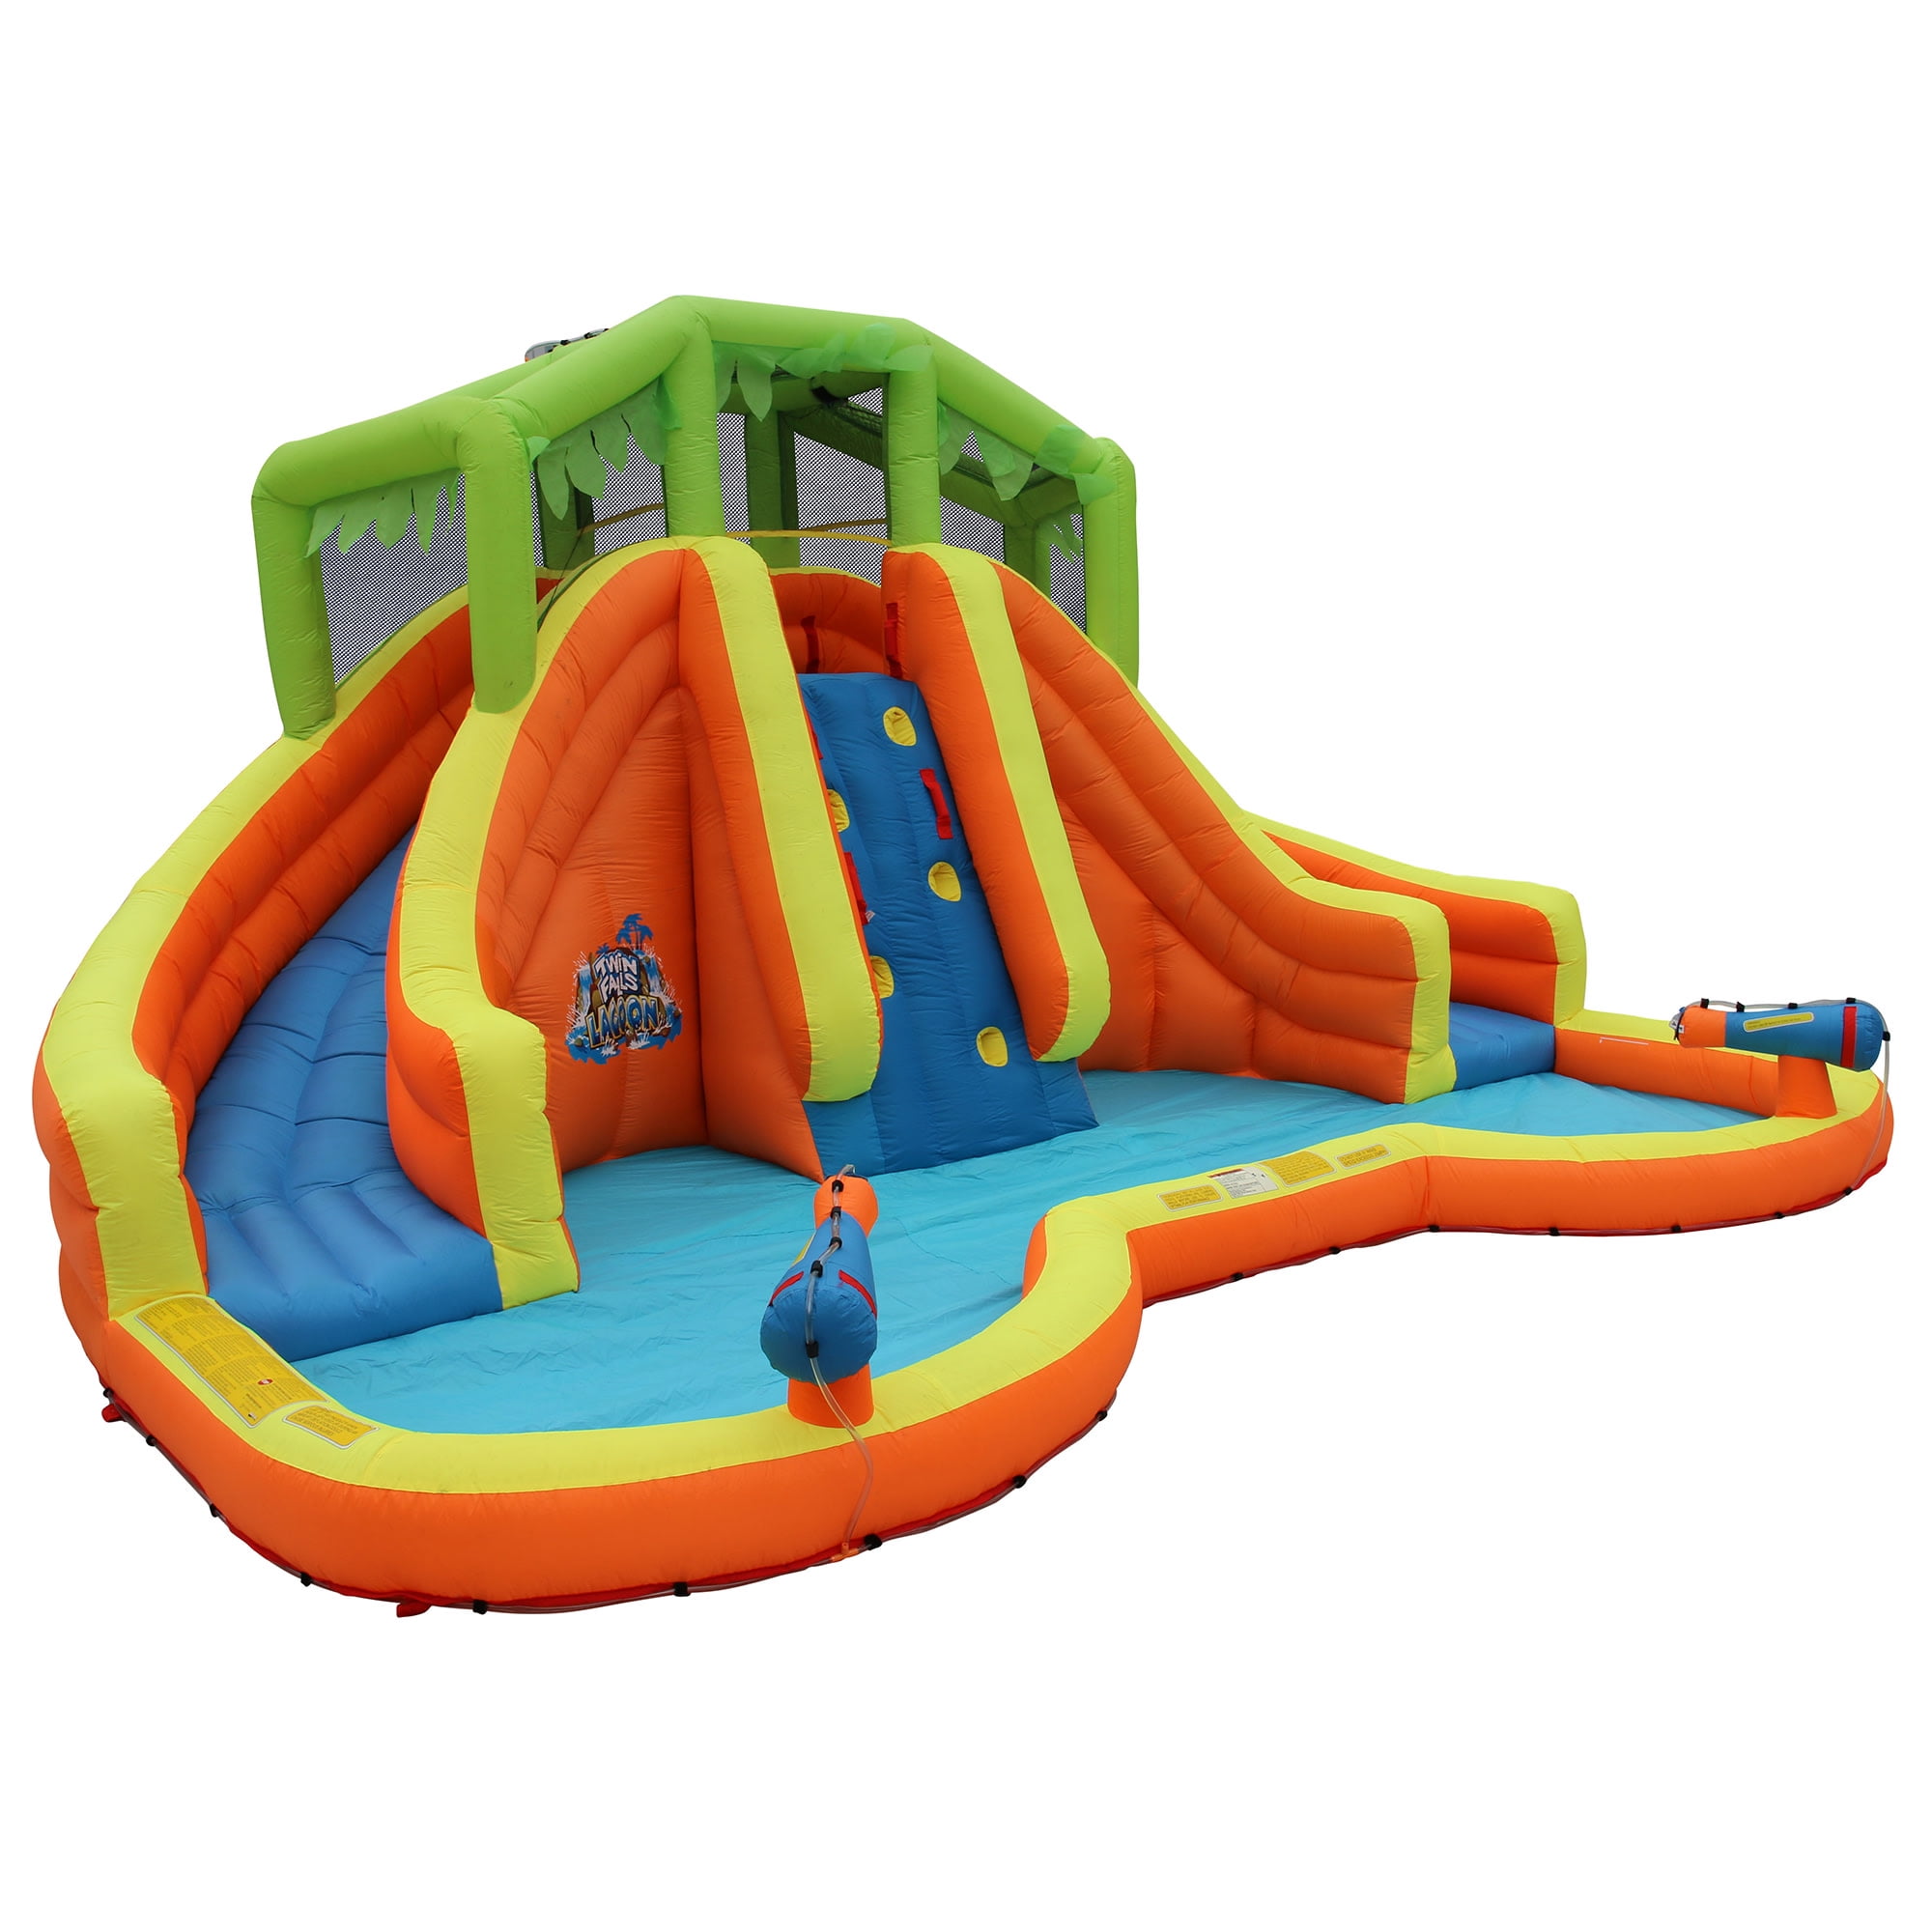 100% made in UE a water slide for children with picture 9 Children's Slide 